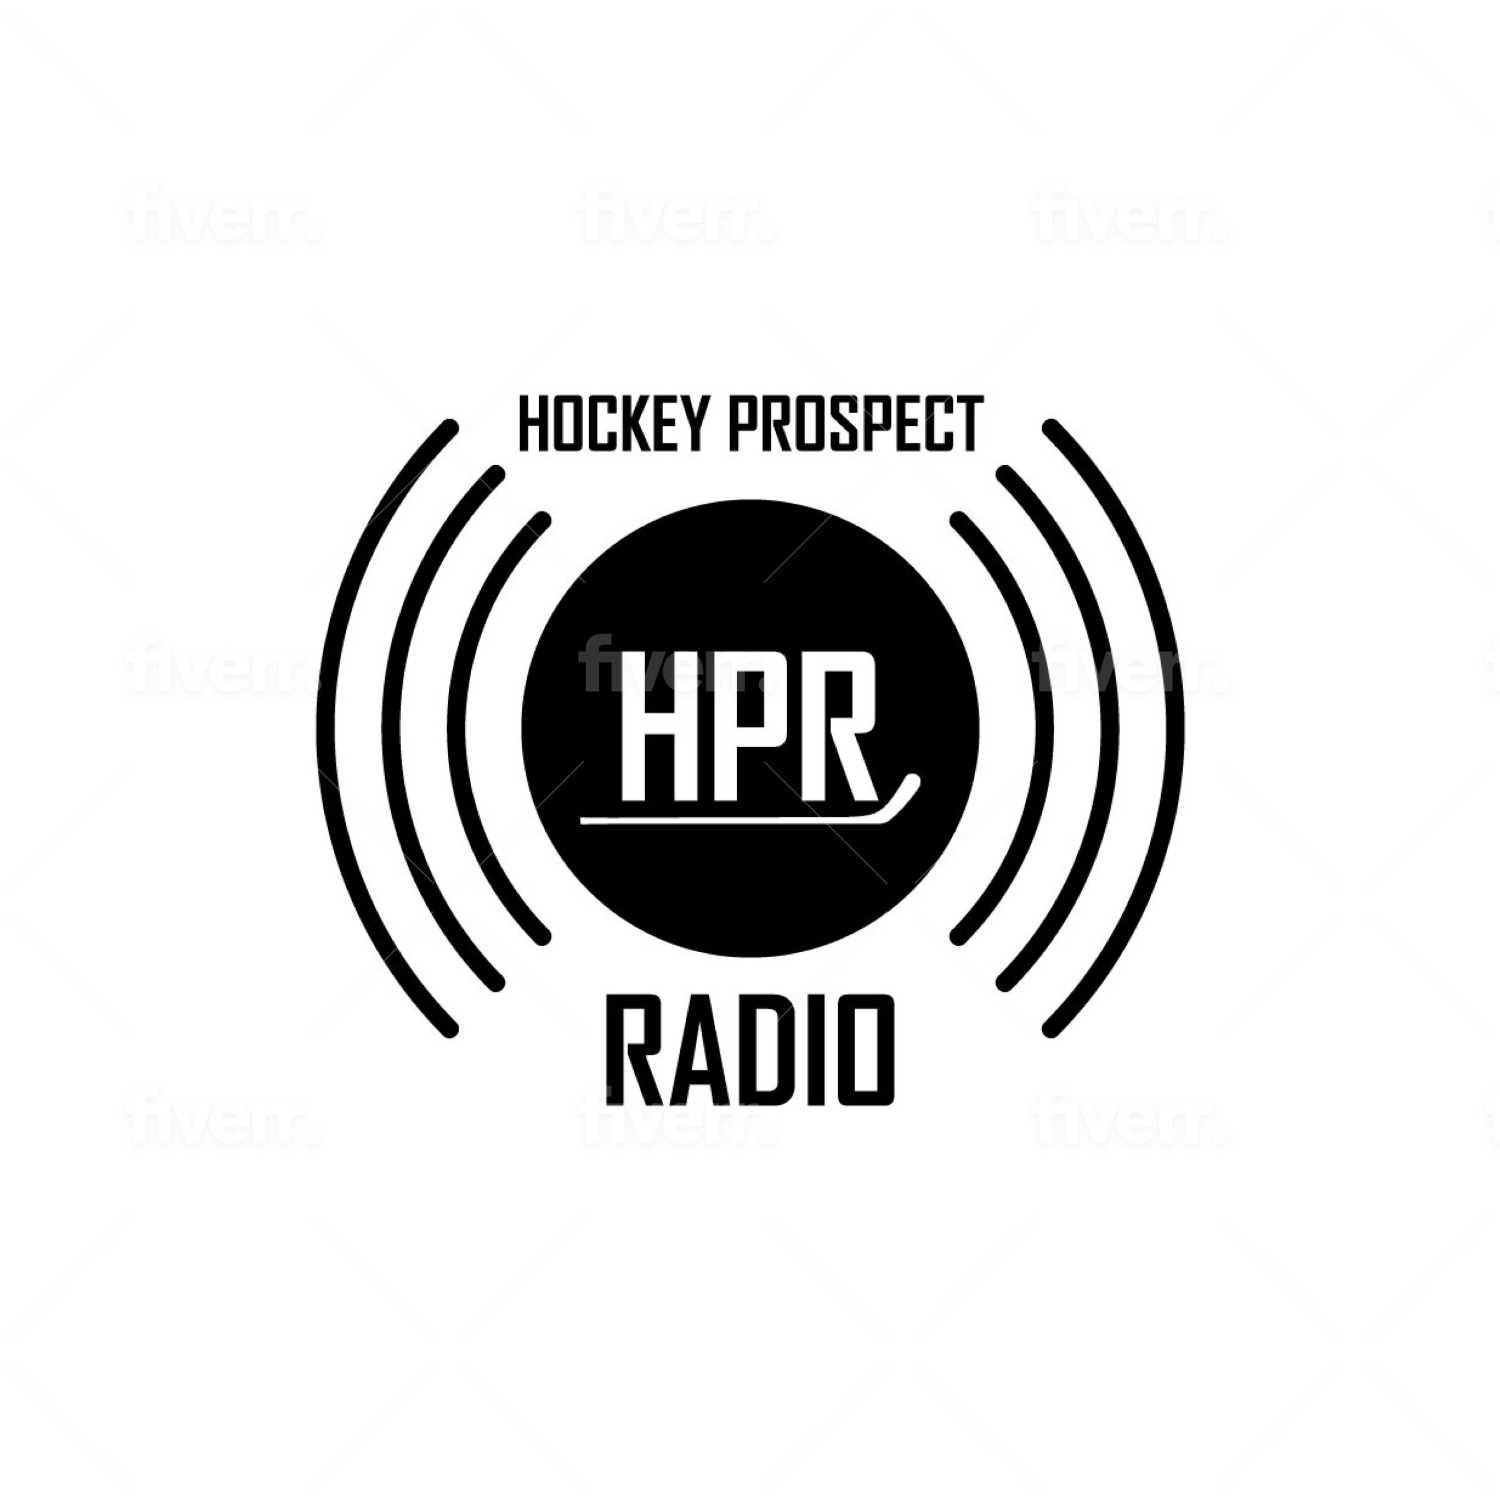 Hockey Prospect Radio - Season 18 - Episode 3 with Shane Malloy & Brad Allen featuring - College Hockey with Mike McMahon, Dr. Norm O’Reilly, Dr. Kevin Willis